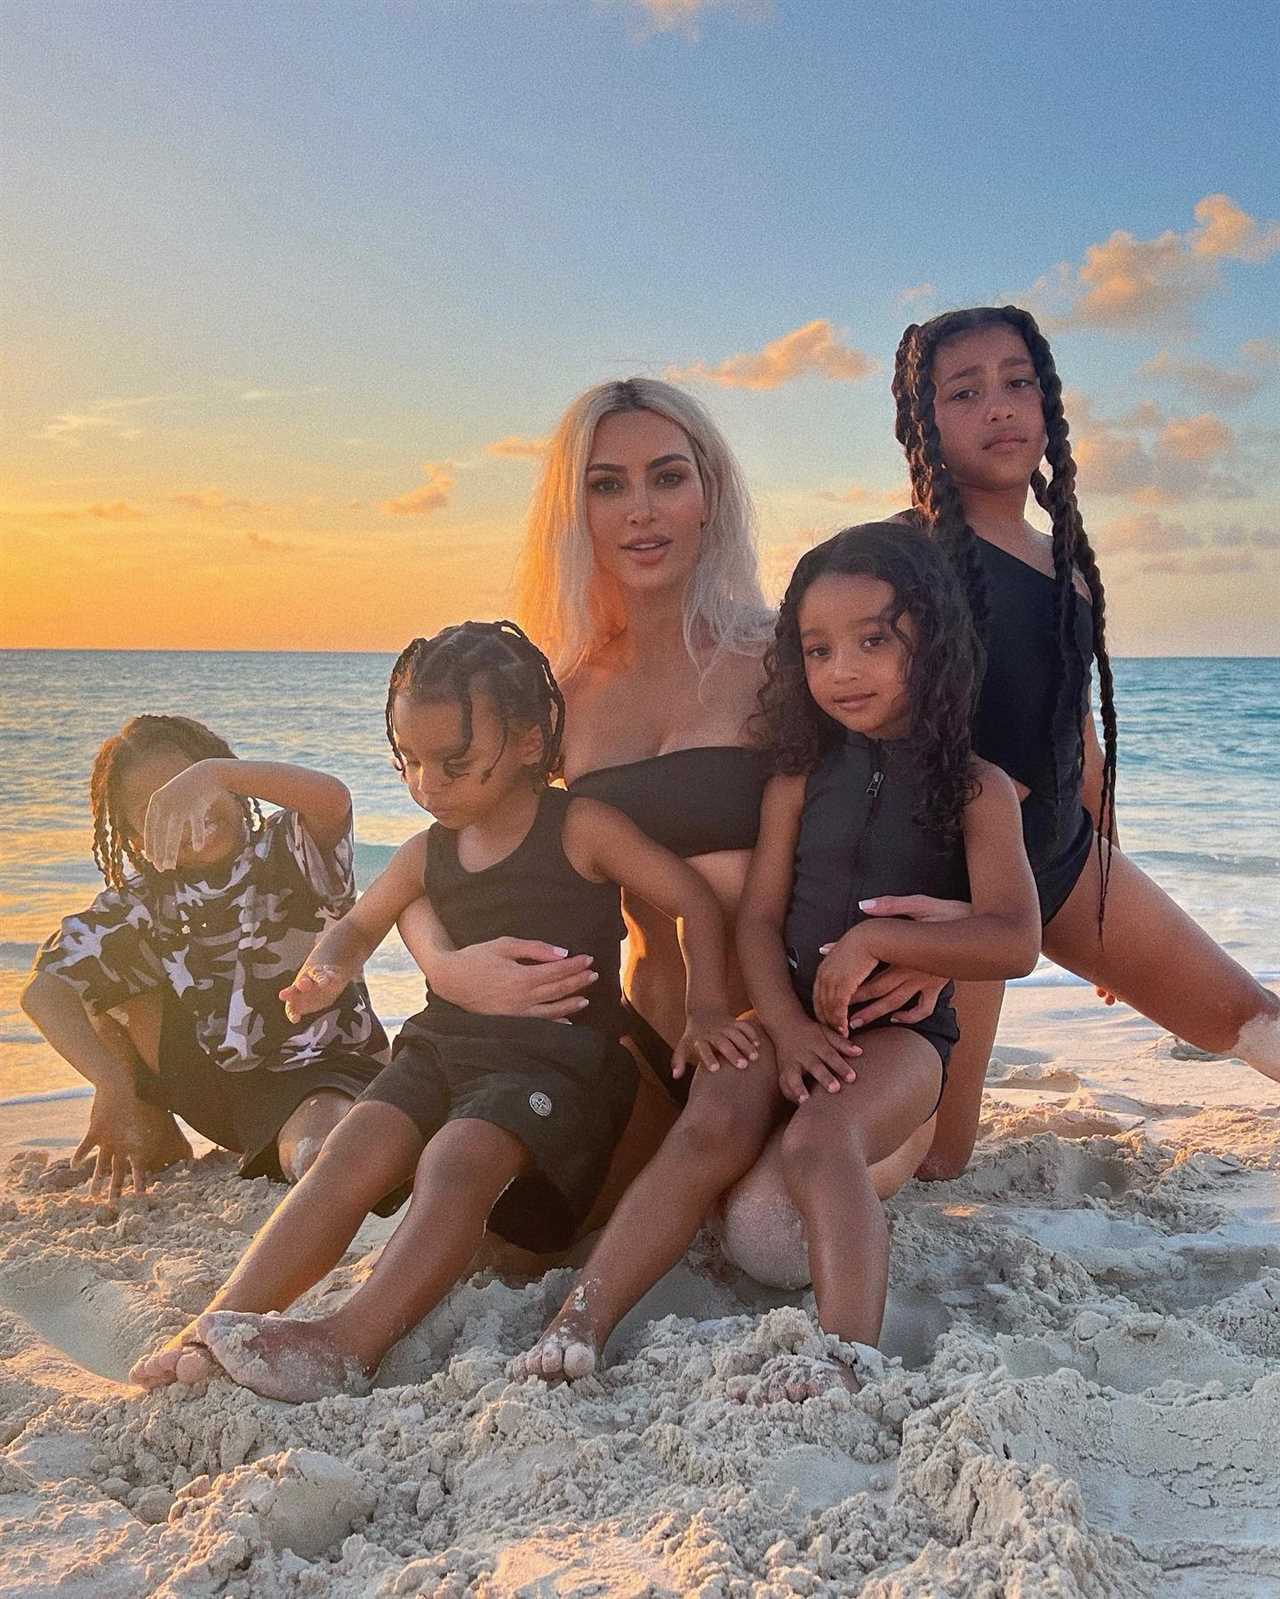 Kardashian fans concerned for Kim’s daughter North, 9, & slam mom for ‘dangerous’ parenting in new family vacation pics